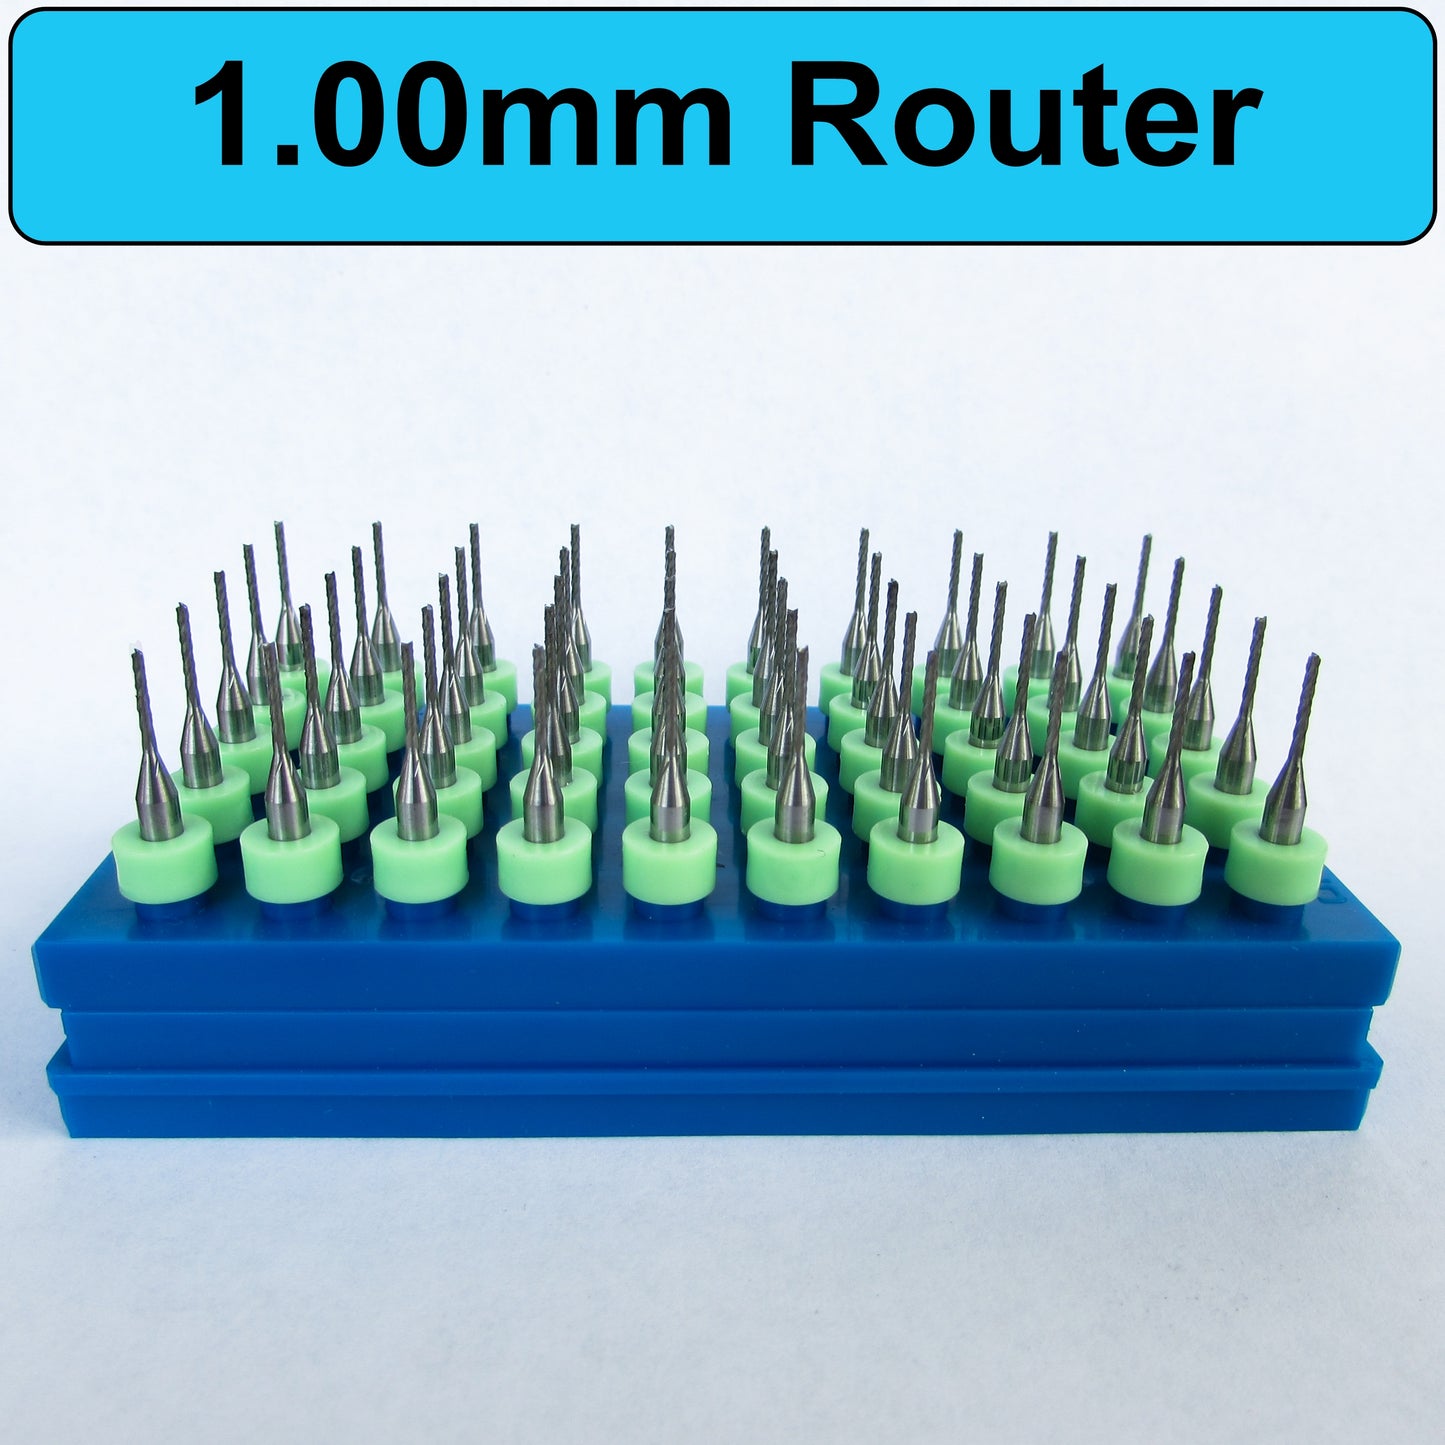 Fifty Pieces 1.00mm Router Bits Diamond Flutes 1/8" Shanks Fish Tail Tip - Up Cut Solid Carbide - Super Value - URD116